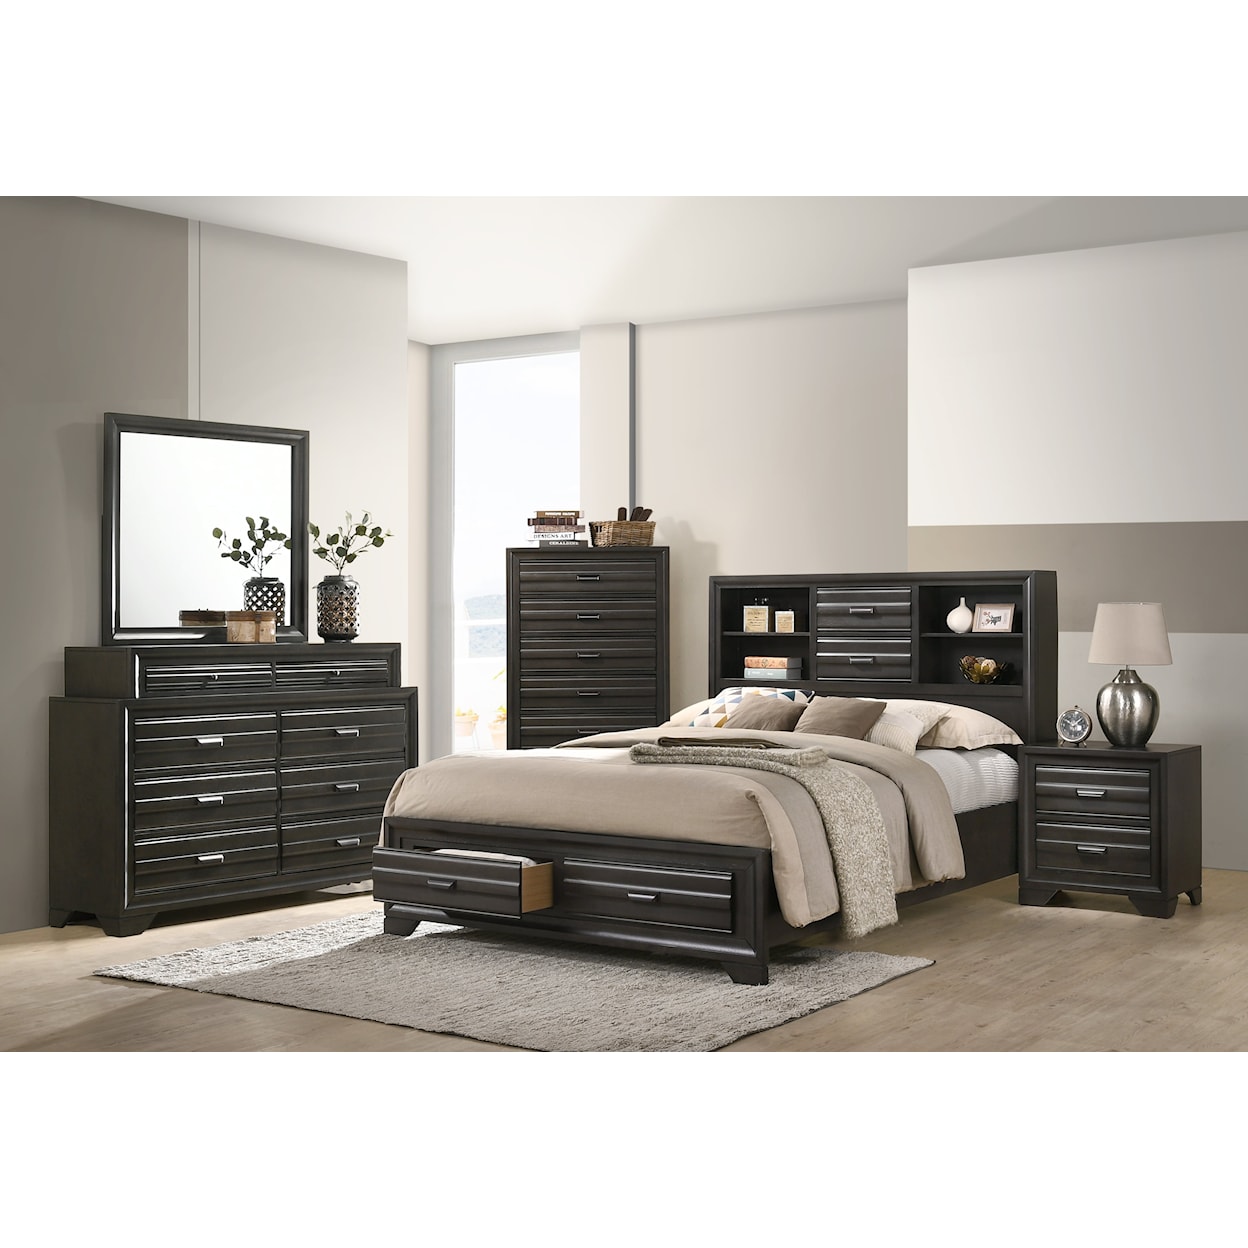 Lifestyle Timmy TIMMY GREY QUEEN BED |